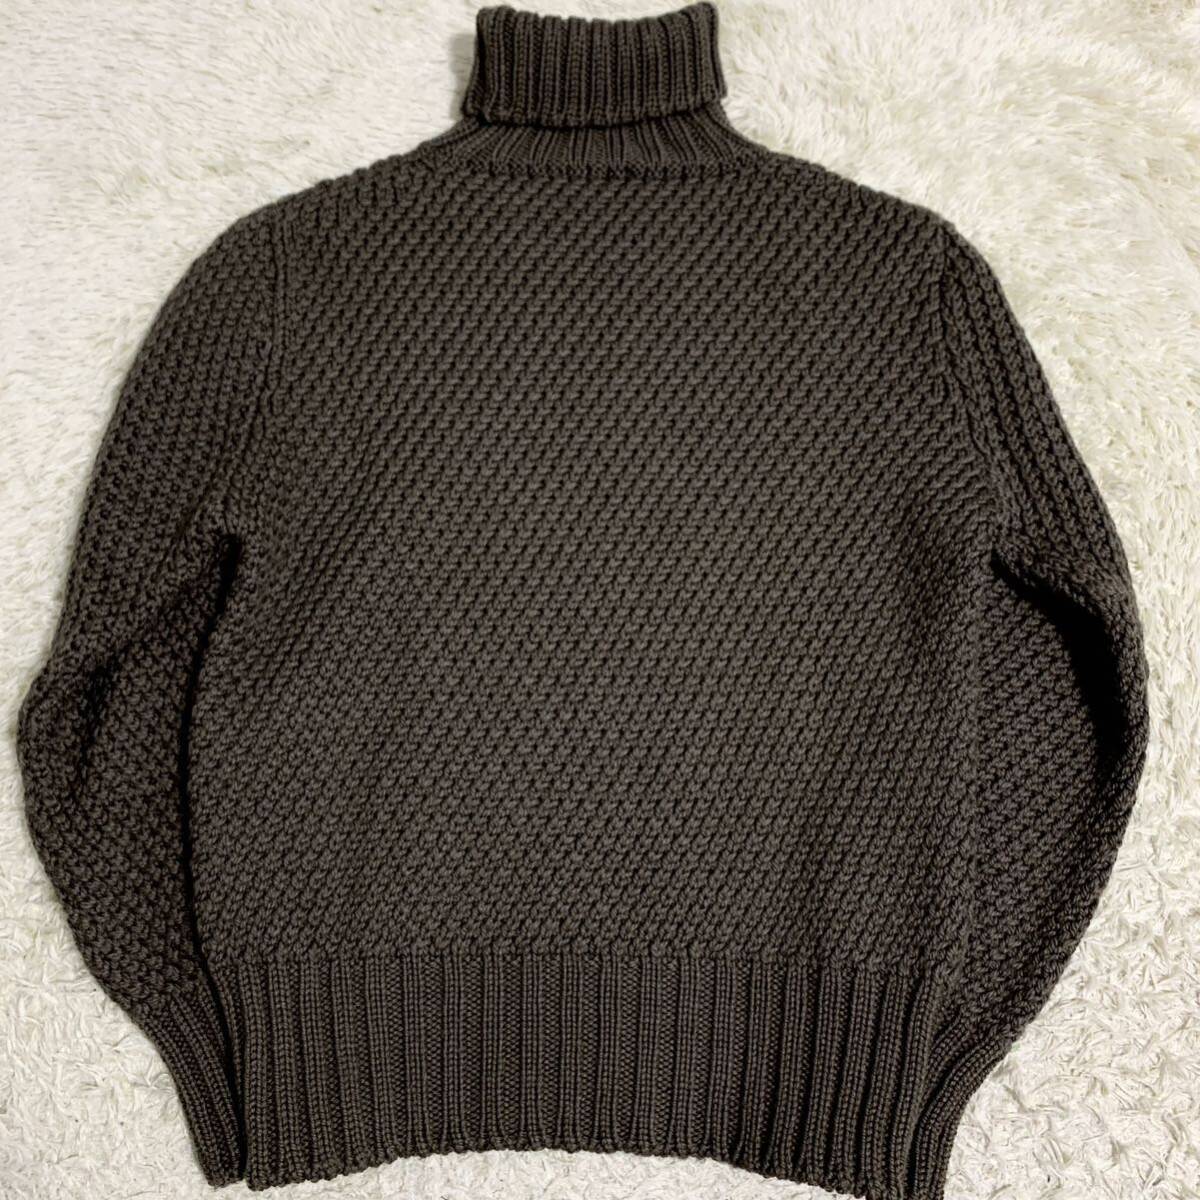  ultimate beautiful goods Gucci [ popular design ] GUCCI sweater knitted tops high‐necked wool men's khaki size M